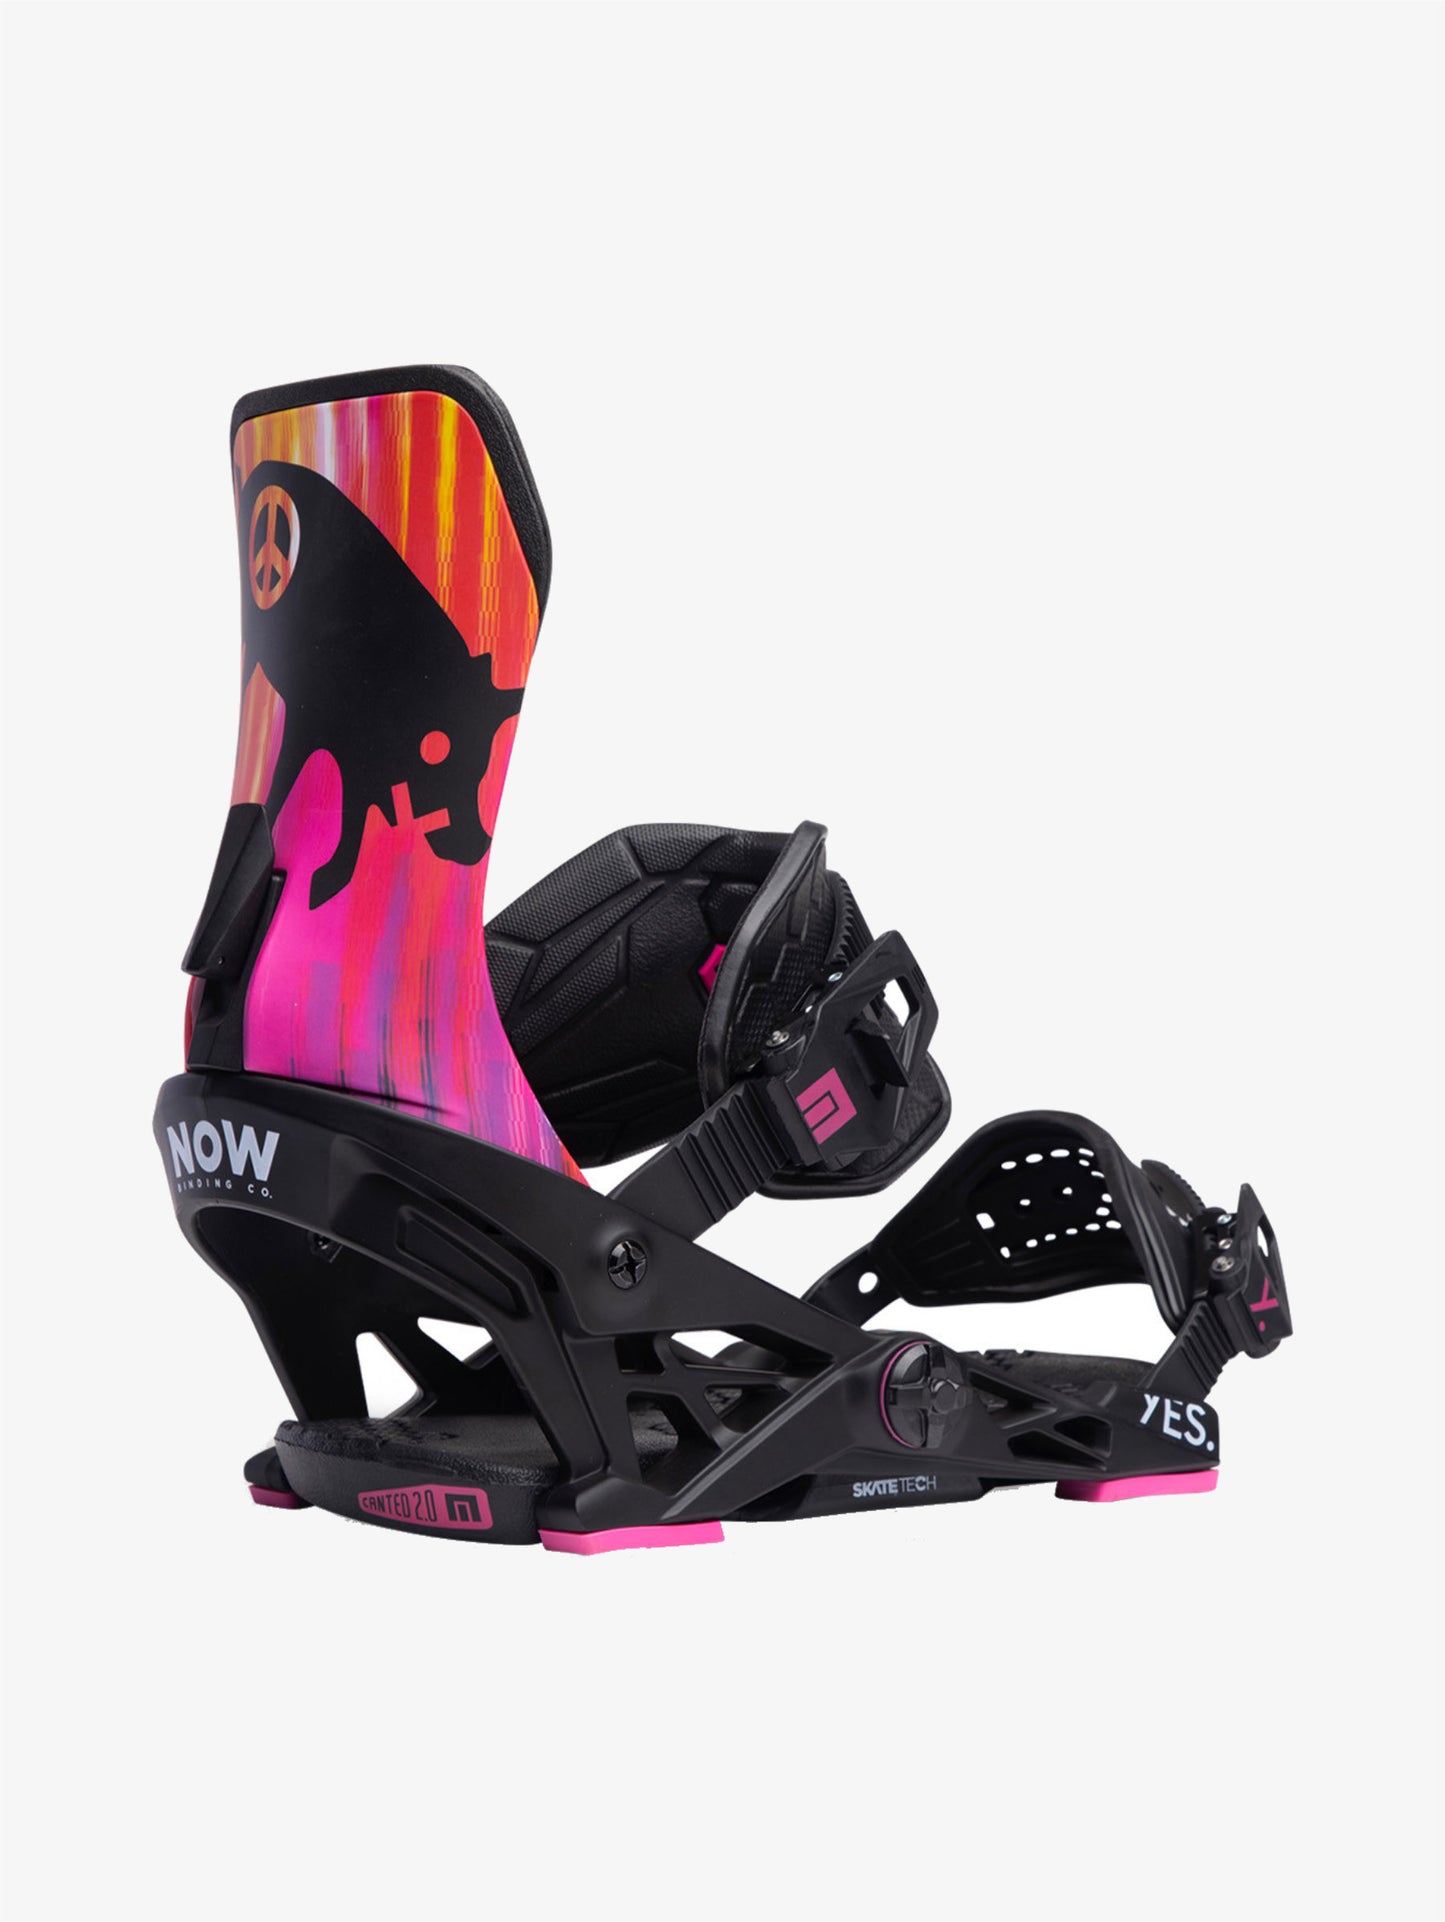 Yes. The Collab snowboard bindings attacchi